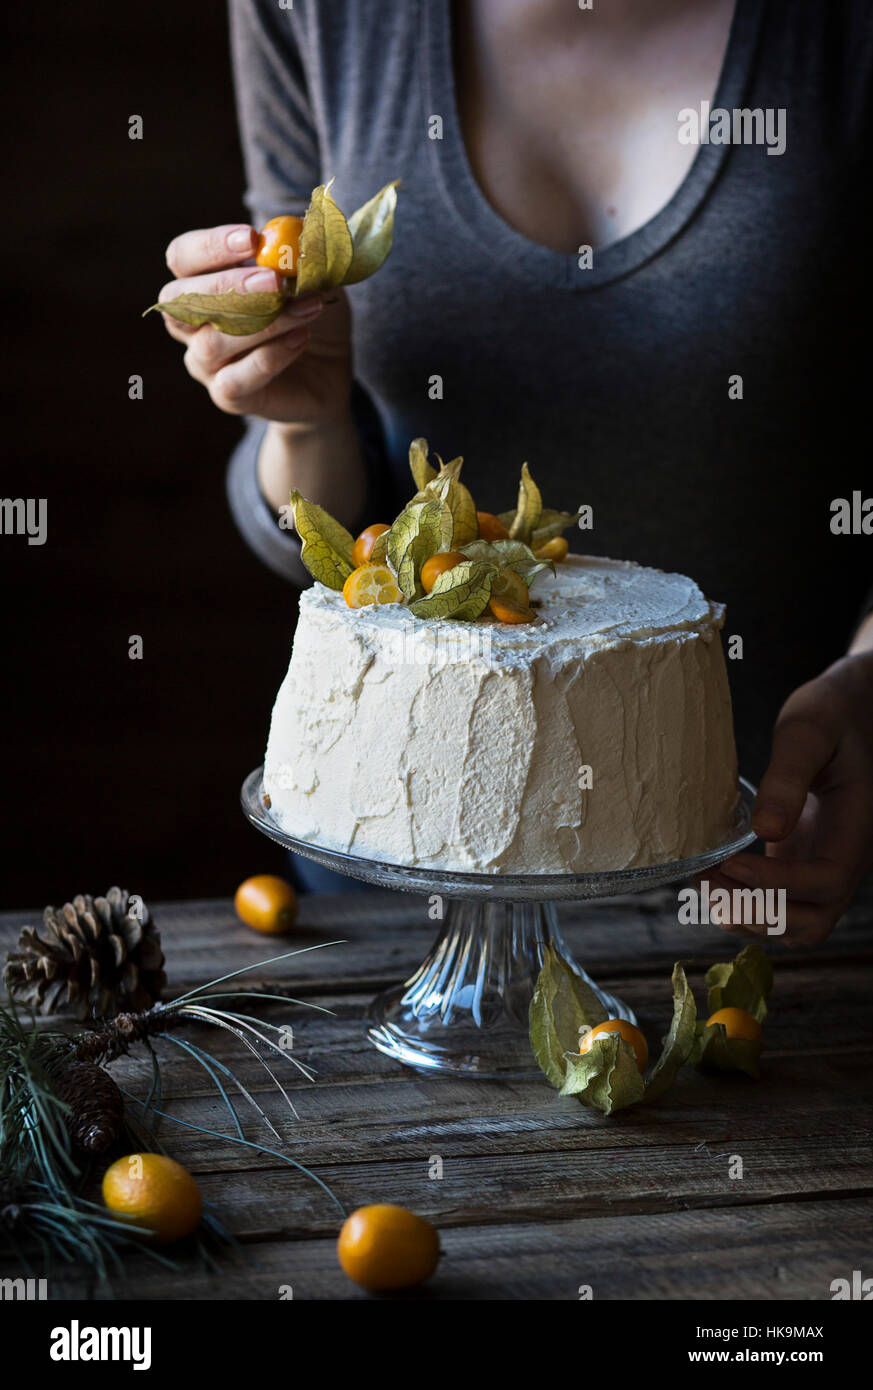 Woman is decorating a chiffon cake on wooden table Stock Photo